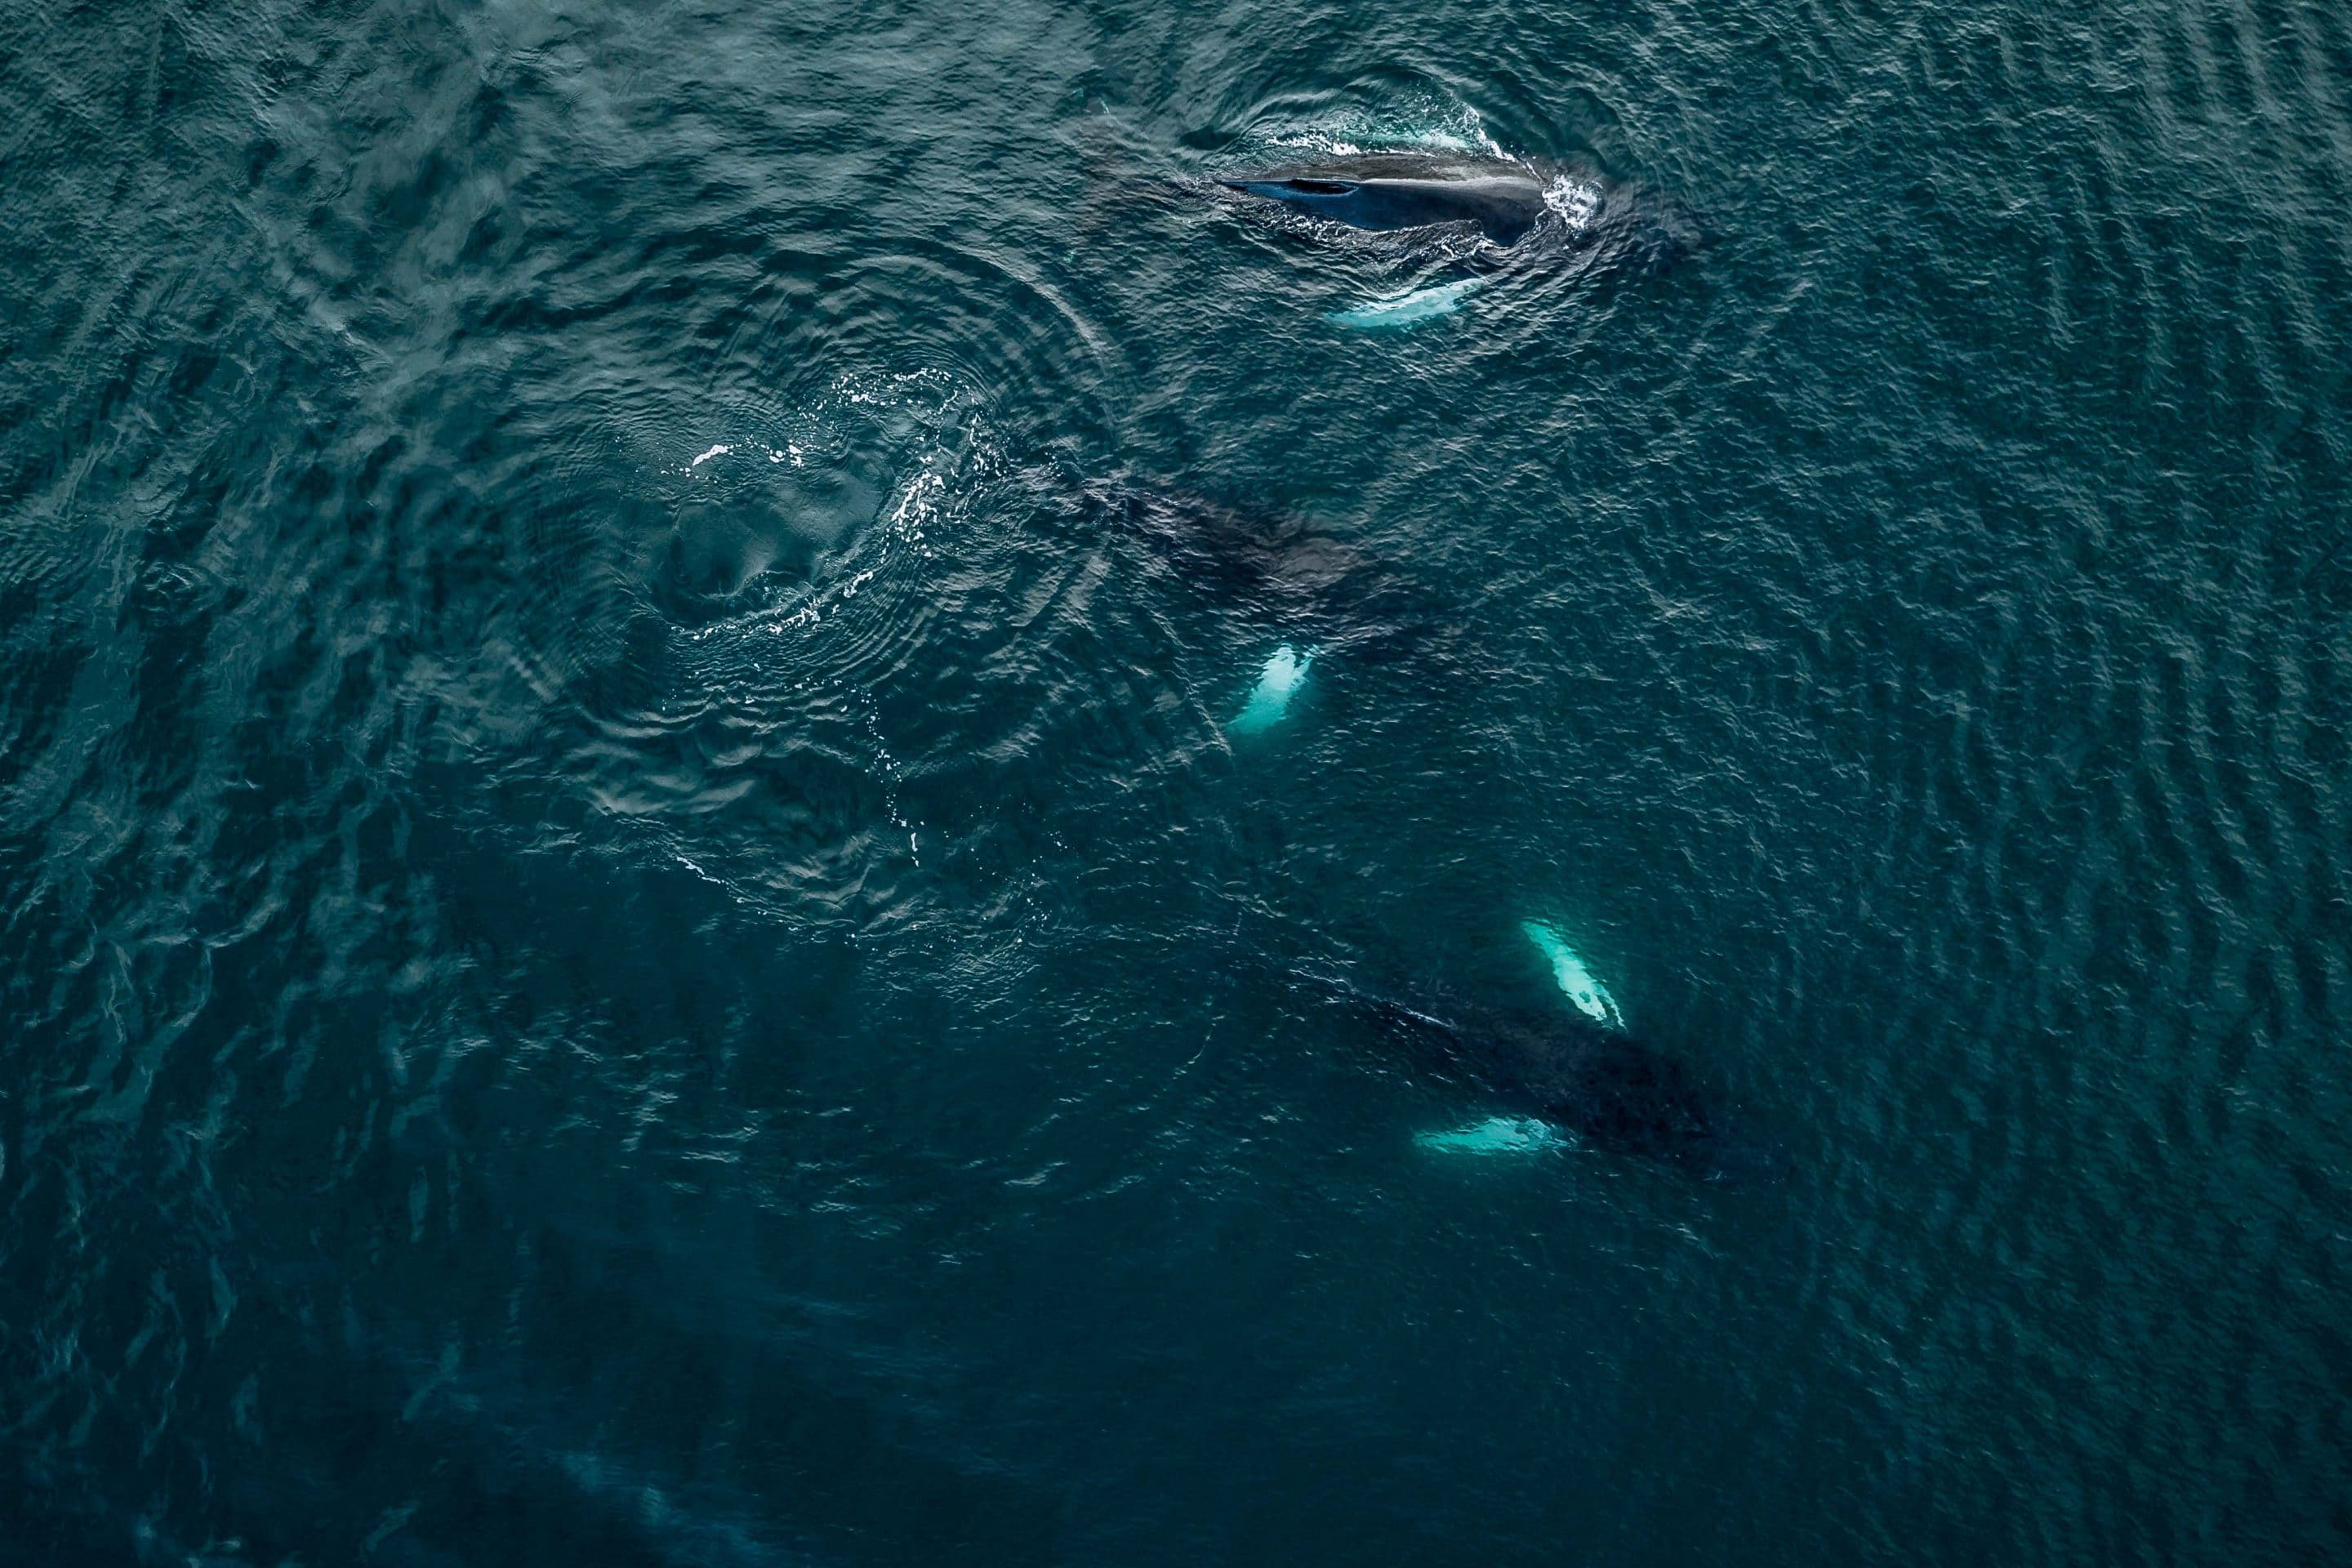 A school of humpback whales captured via drone in the ocean near the Icelandic coast playfully engaging with a ship by photographer Michael Schauer